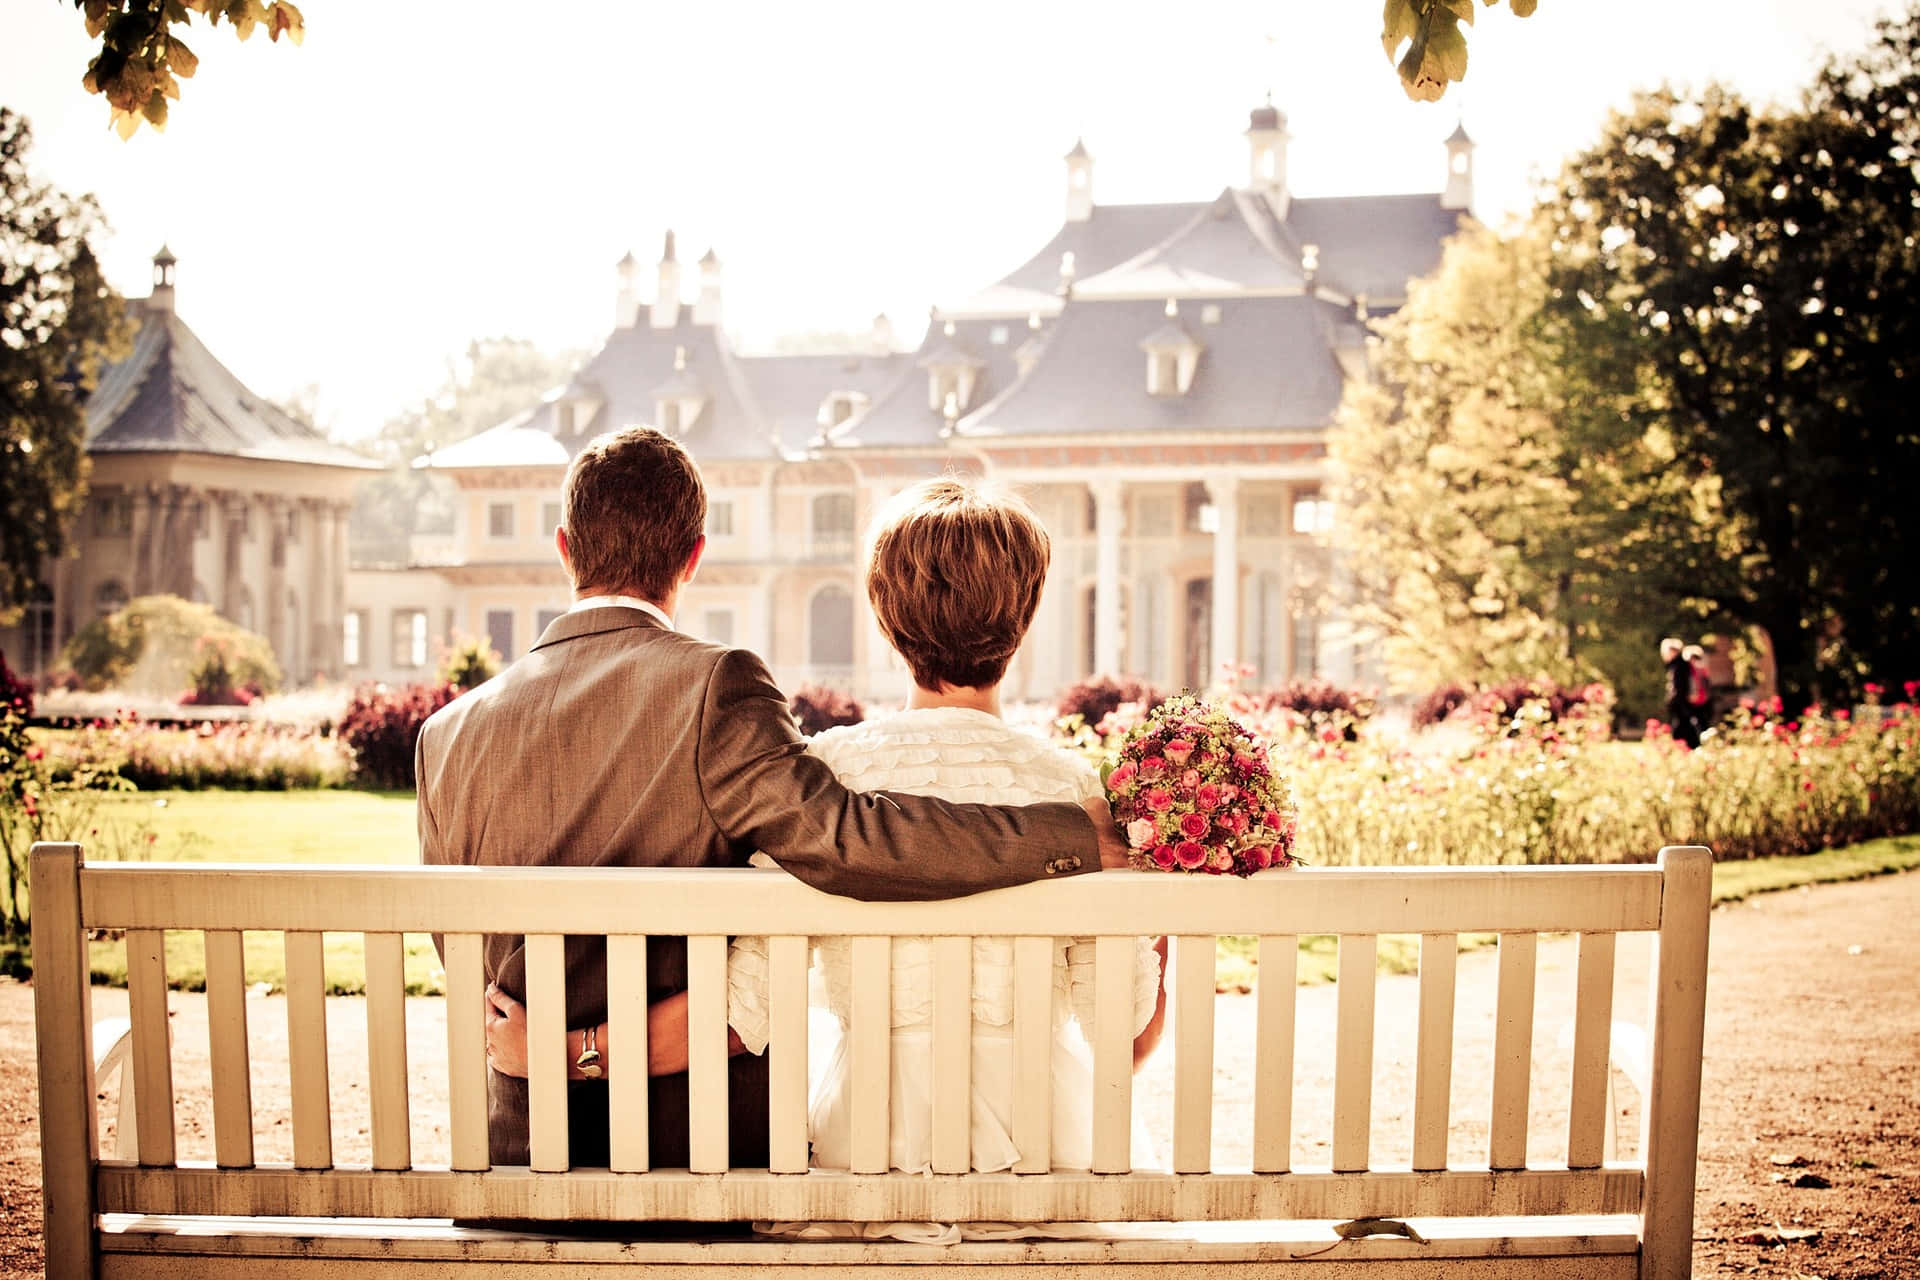 Couple Sitting On Bench Relationship Picture